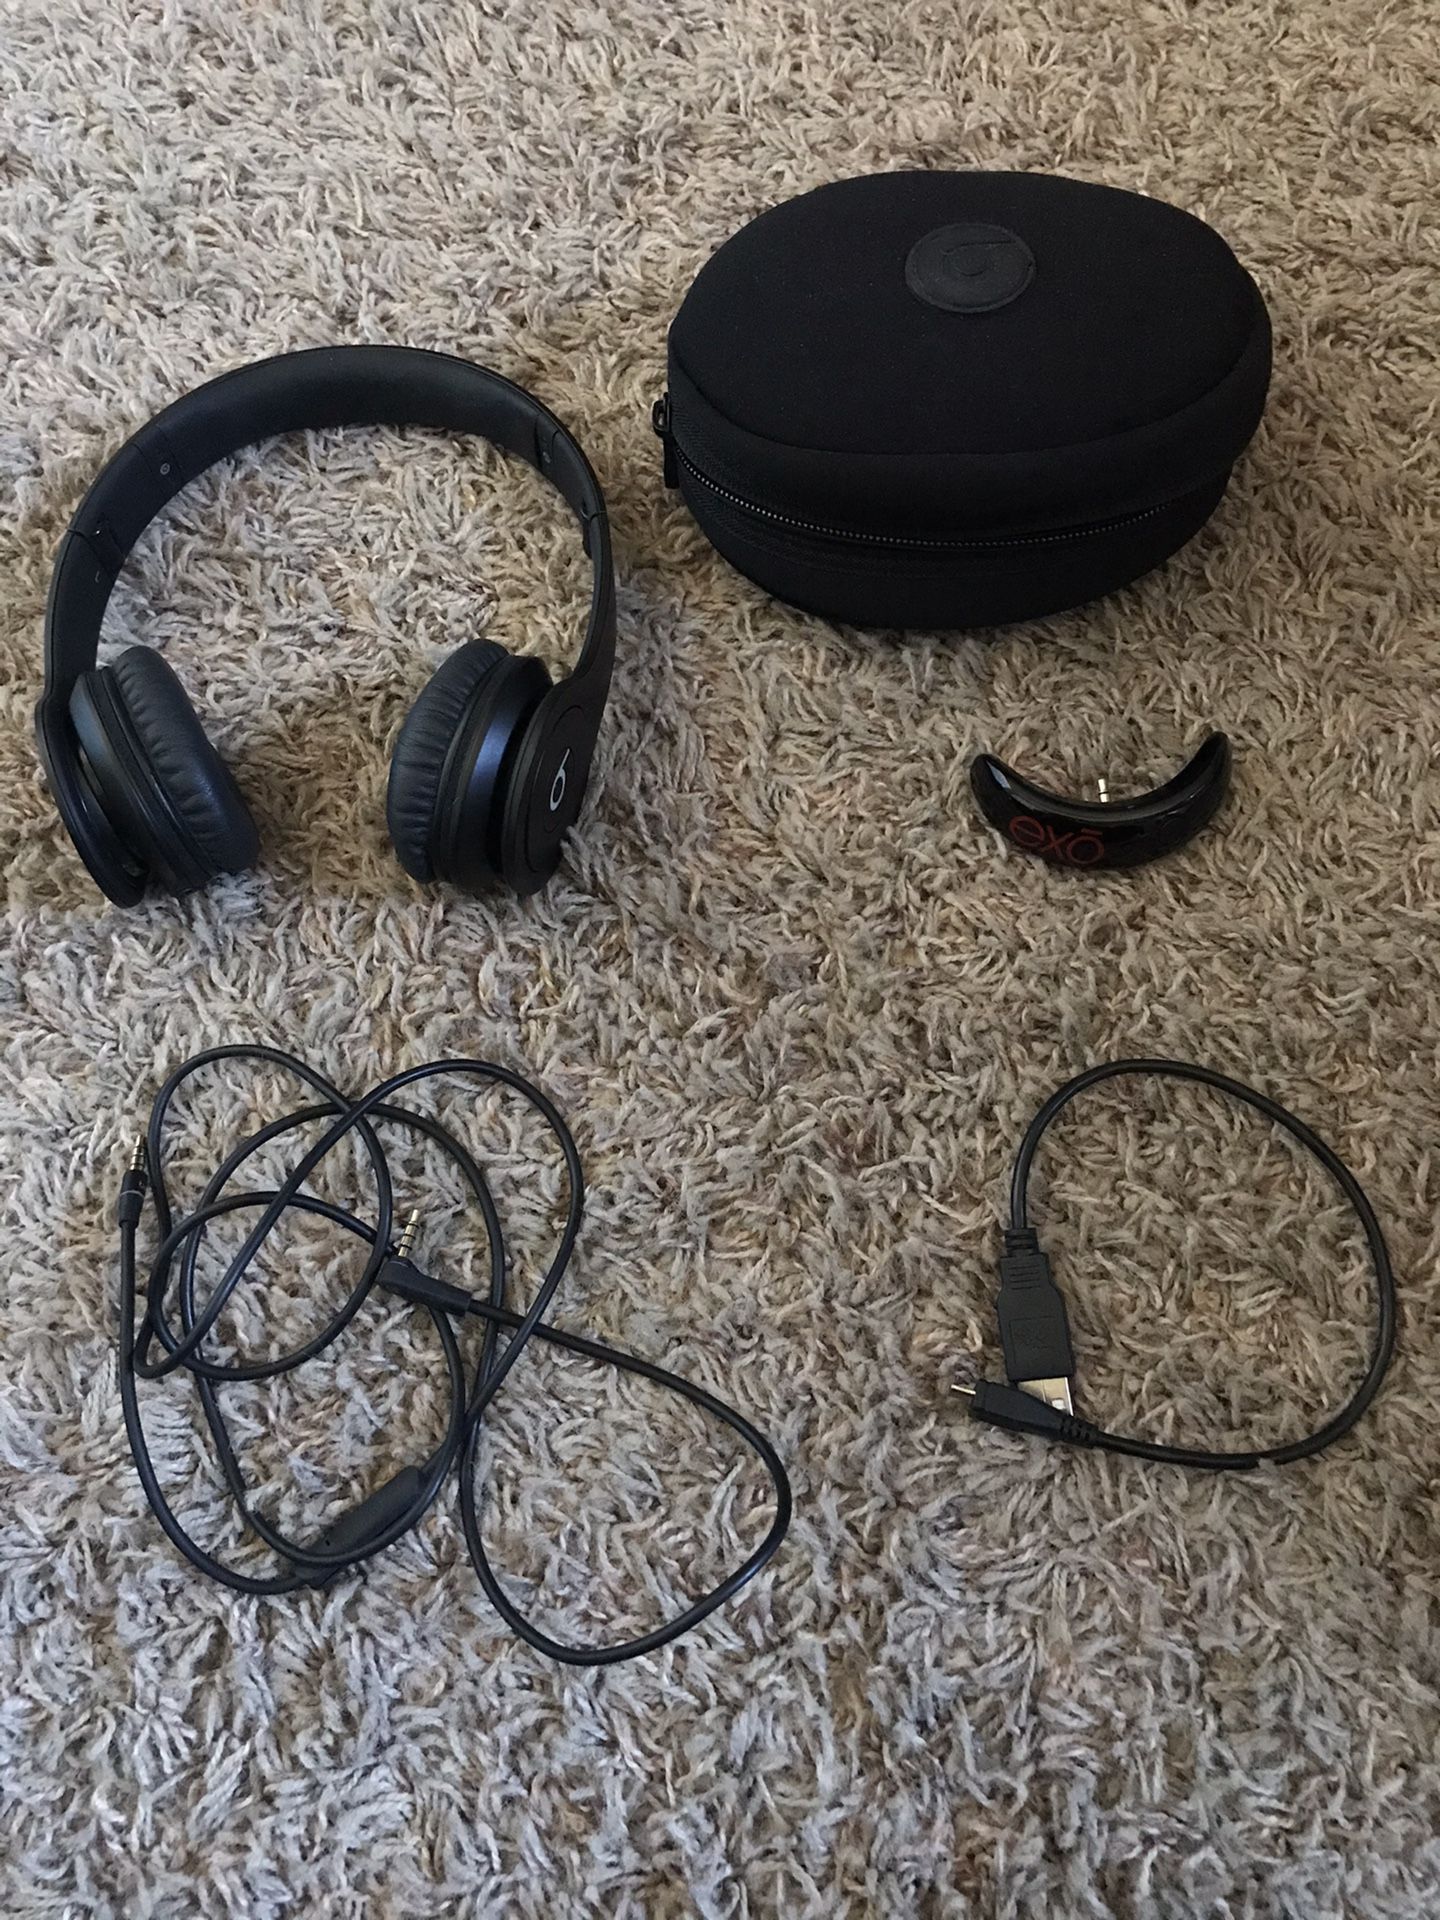 Beats solo hd with wireless Bluetooth adapter